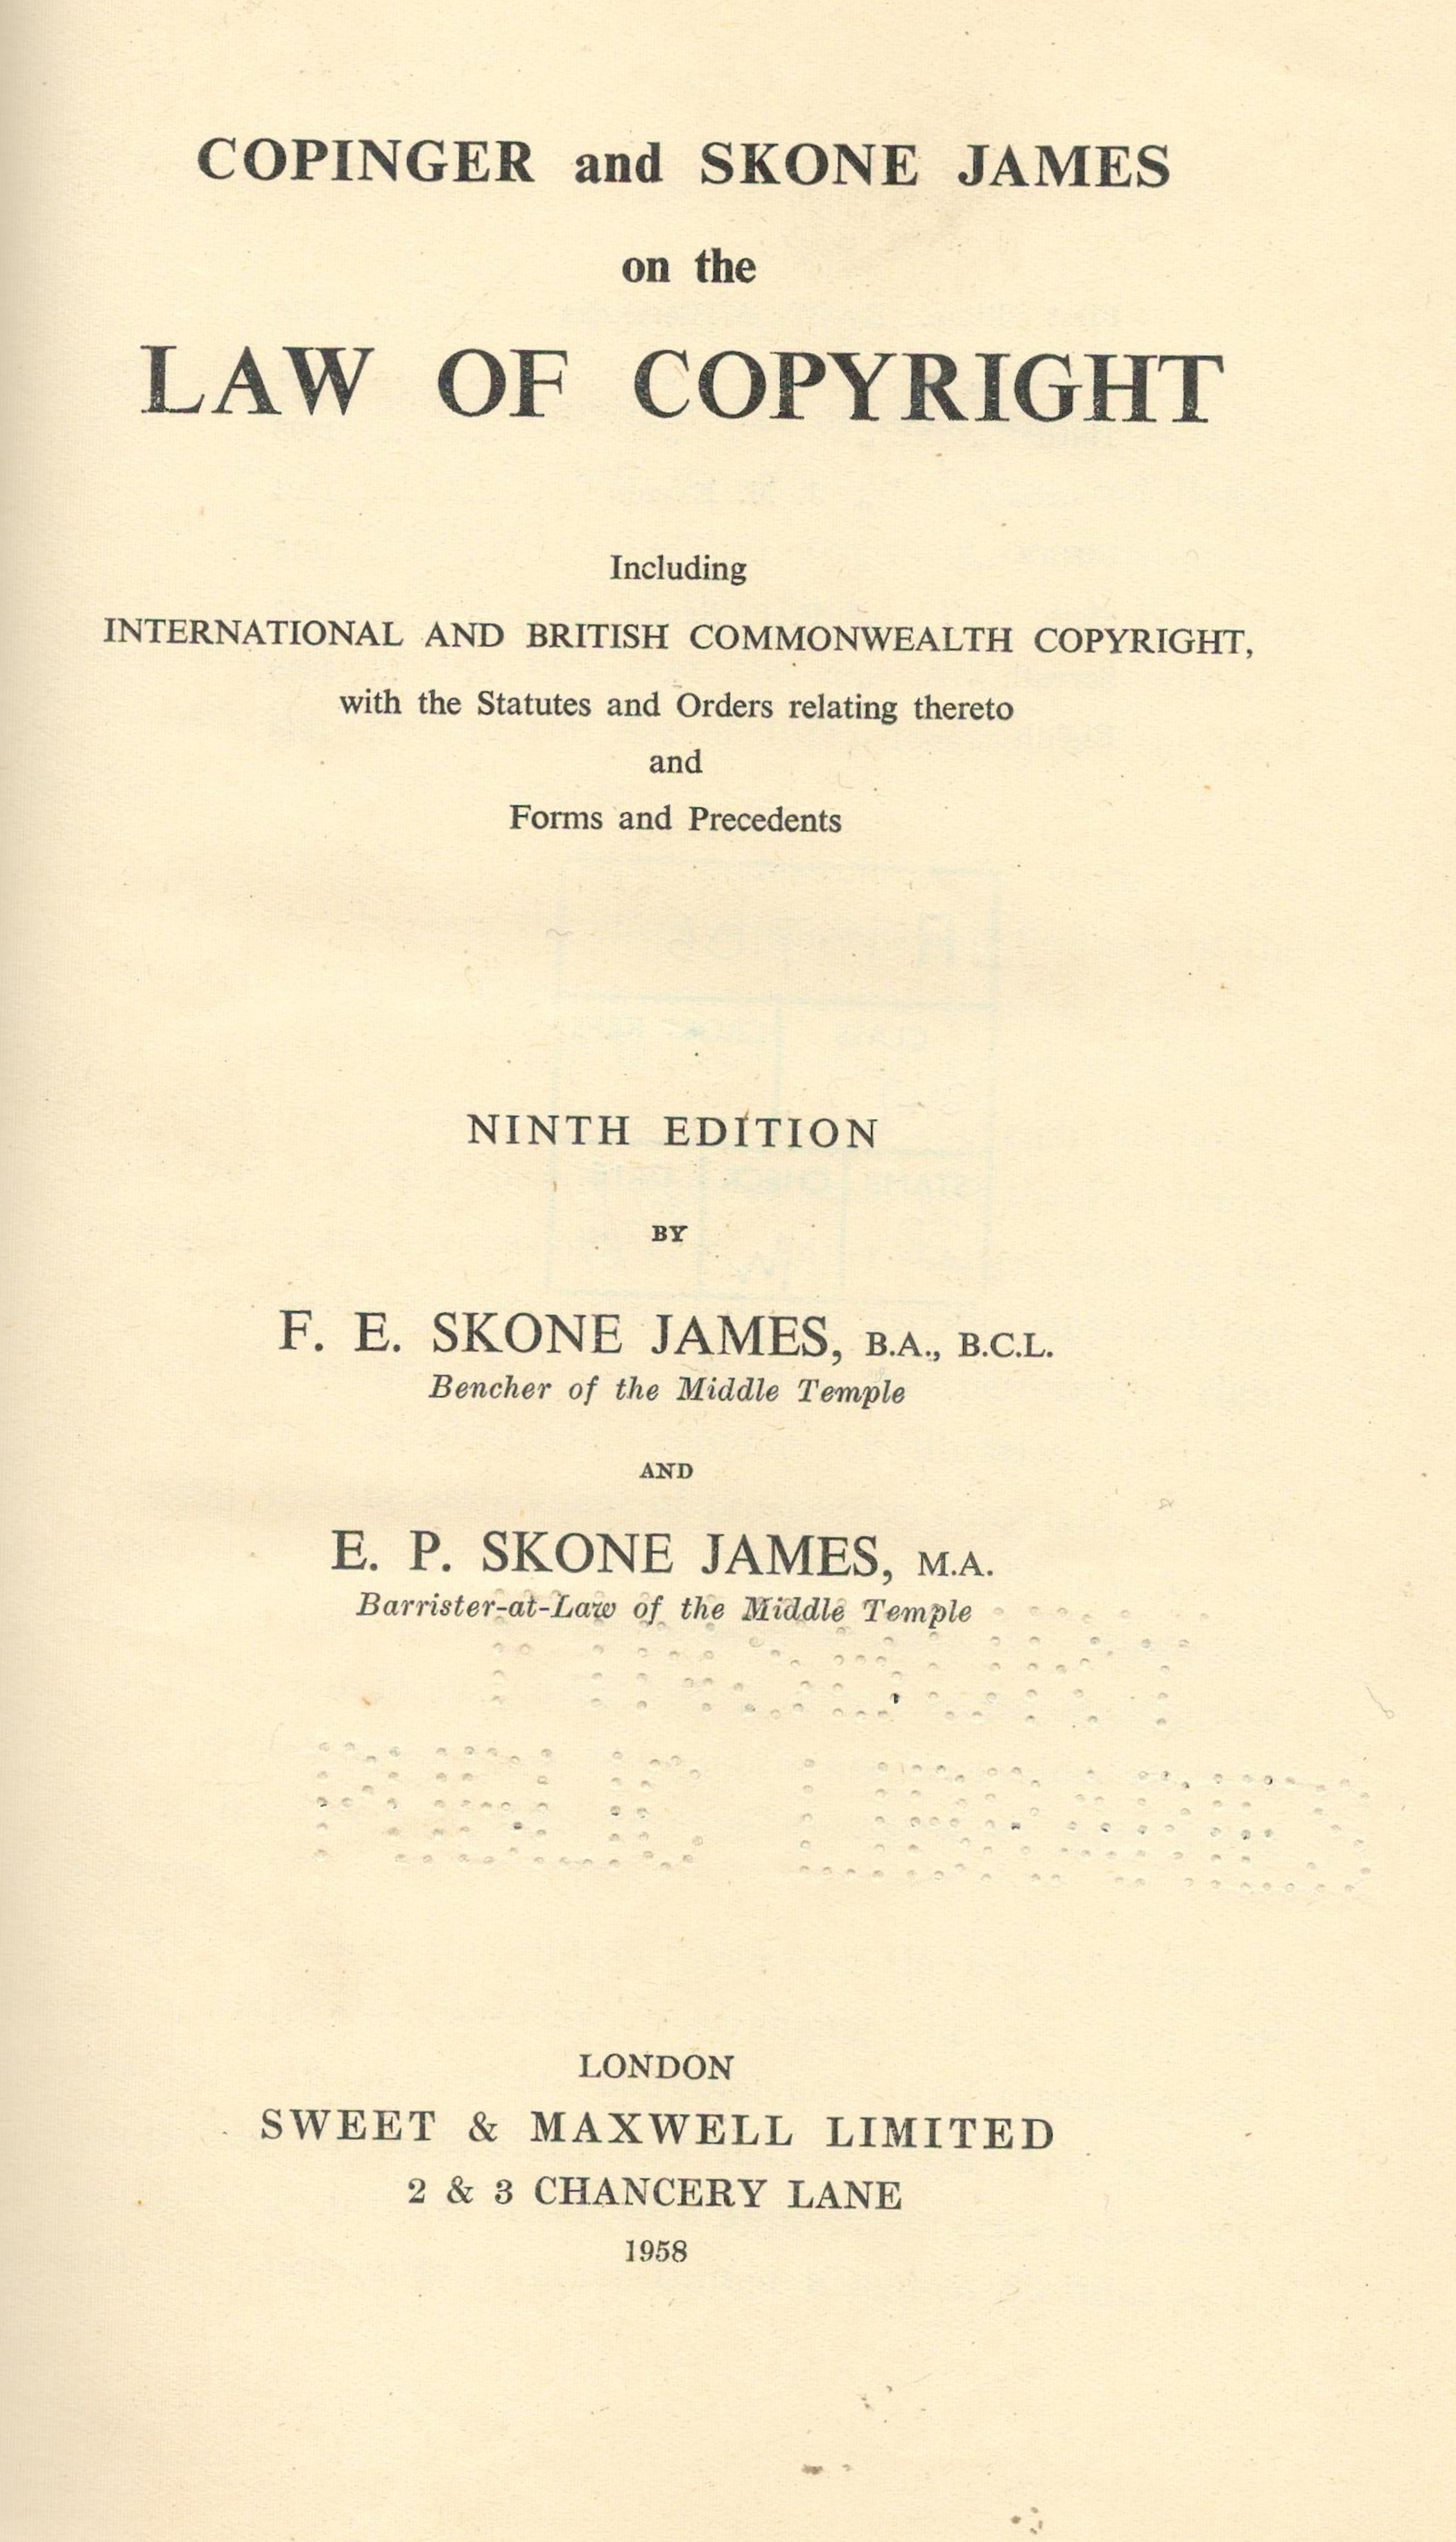 Copinger and Skone James on the Law of Copyright by F E Skone James 1958 Hardback Book ninth Edition - Image 3 of 3